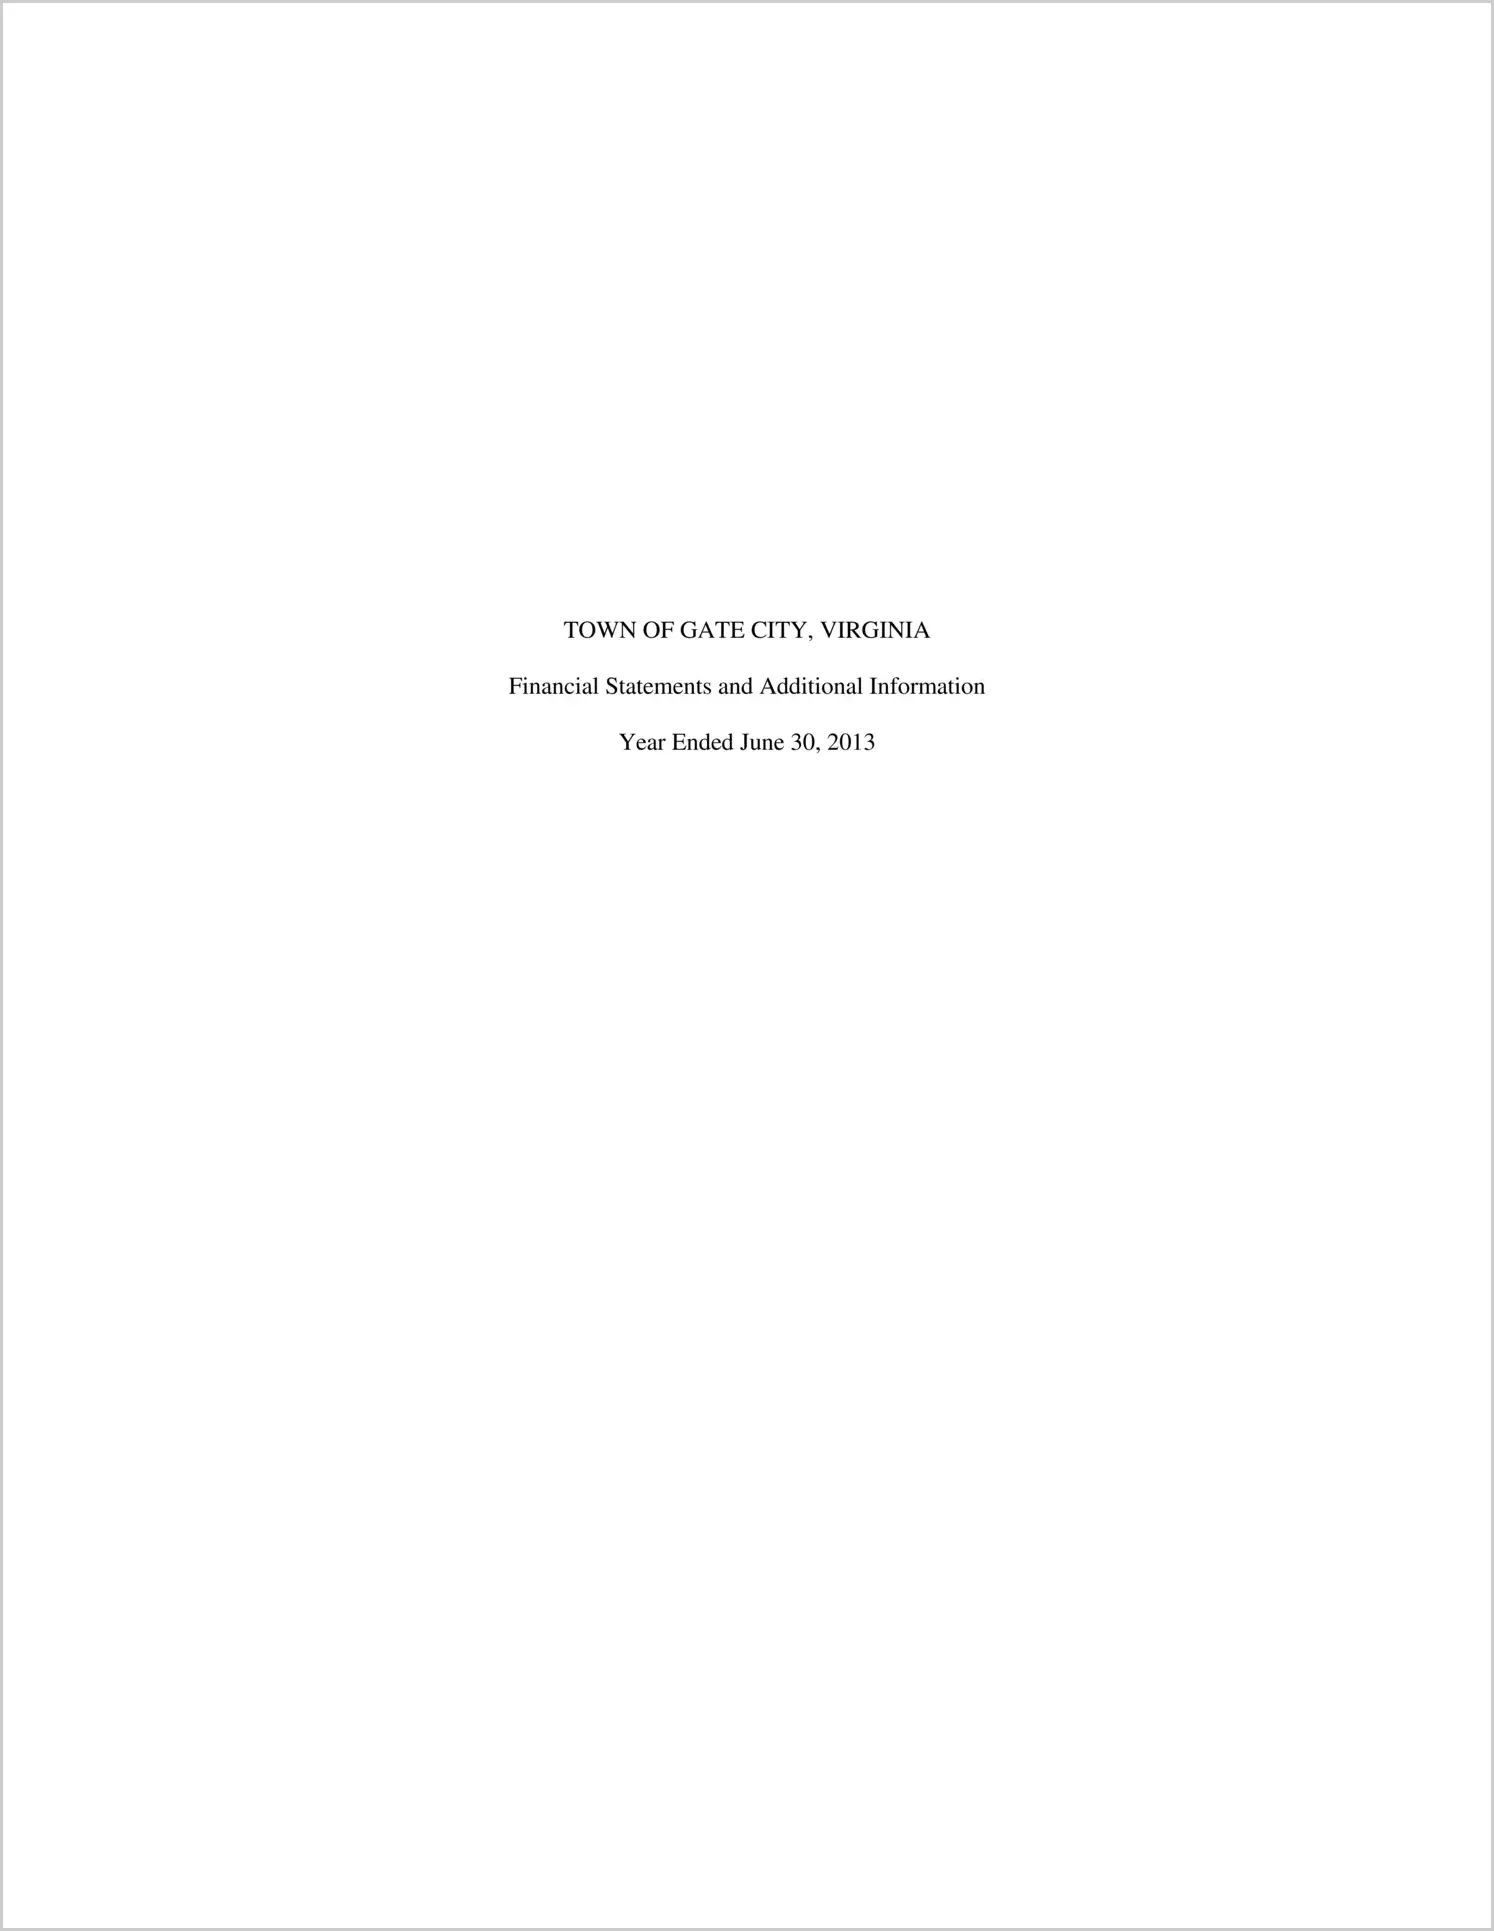 2013 Annual Financial Report for Town of Gate City